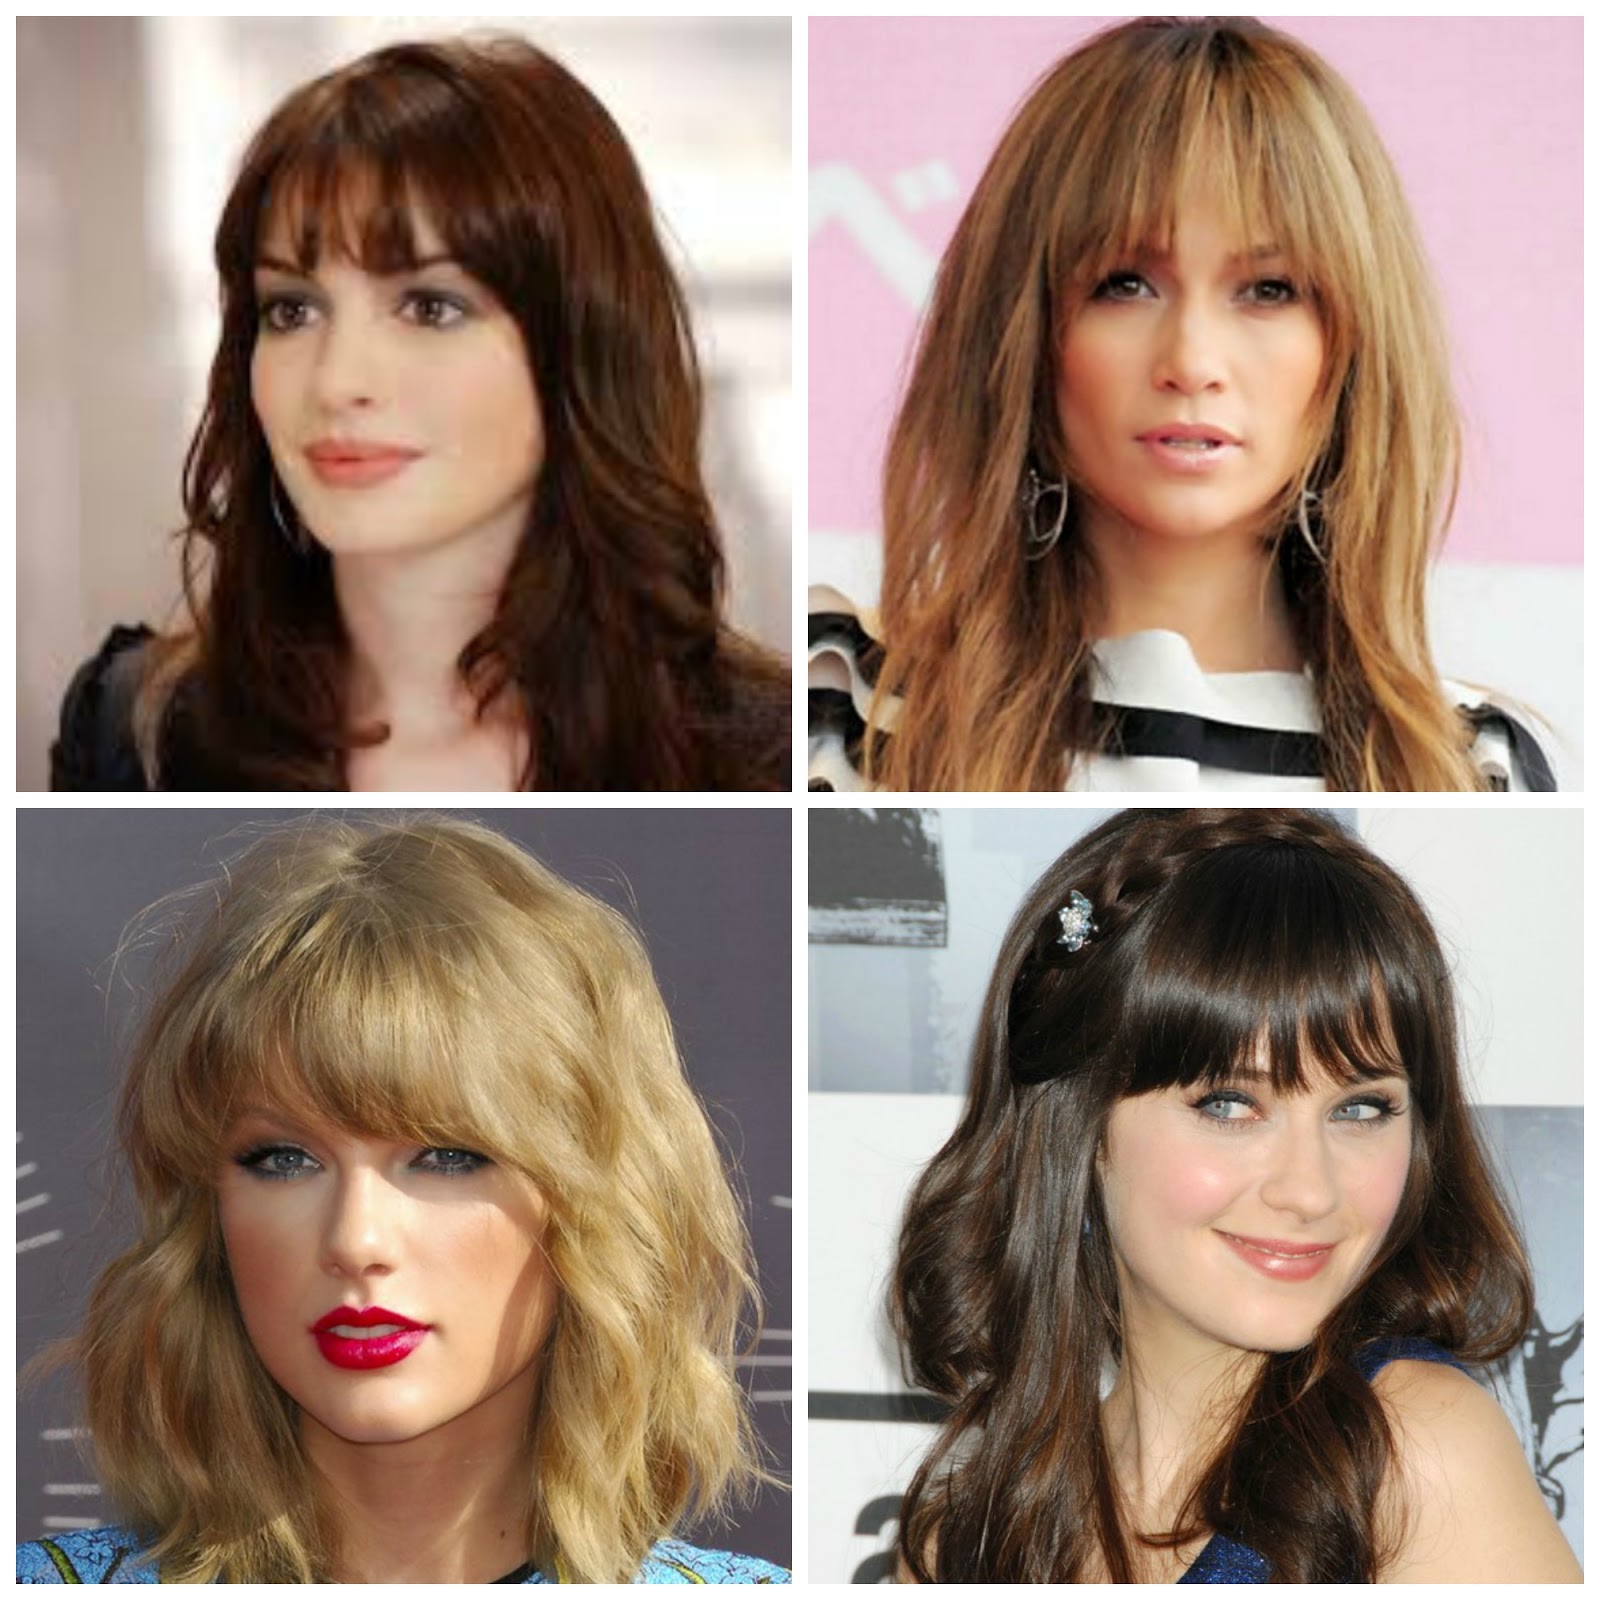 Laurajanestyle: How to cut a perfect fringe - DIY